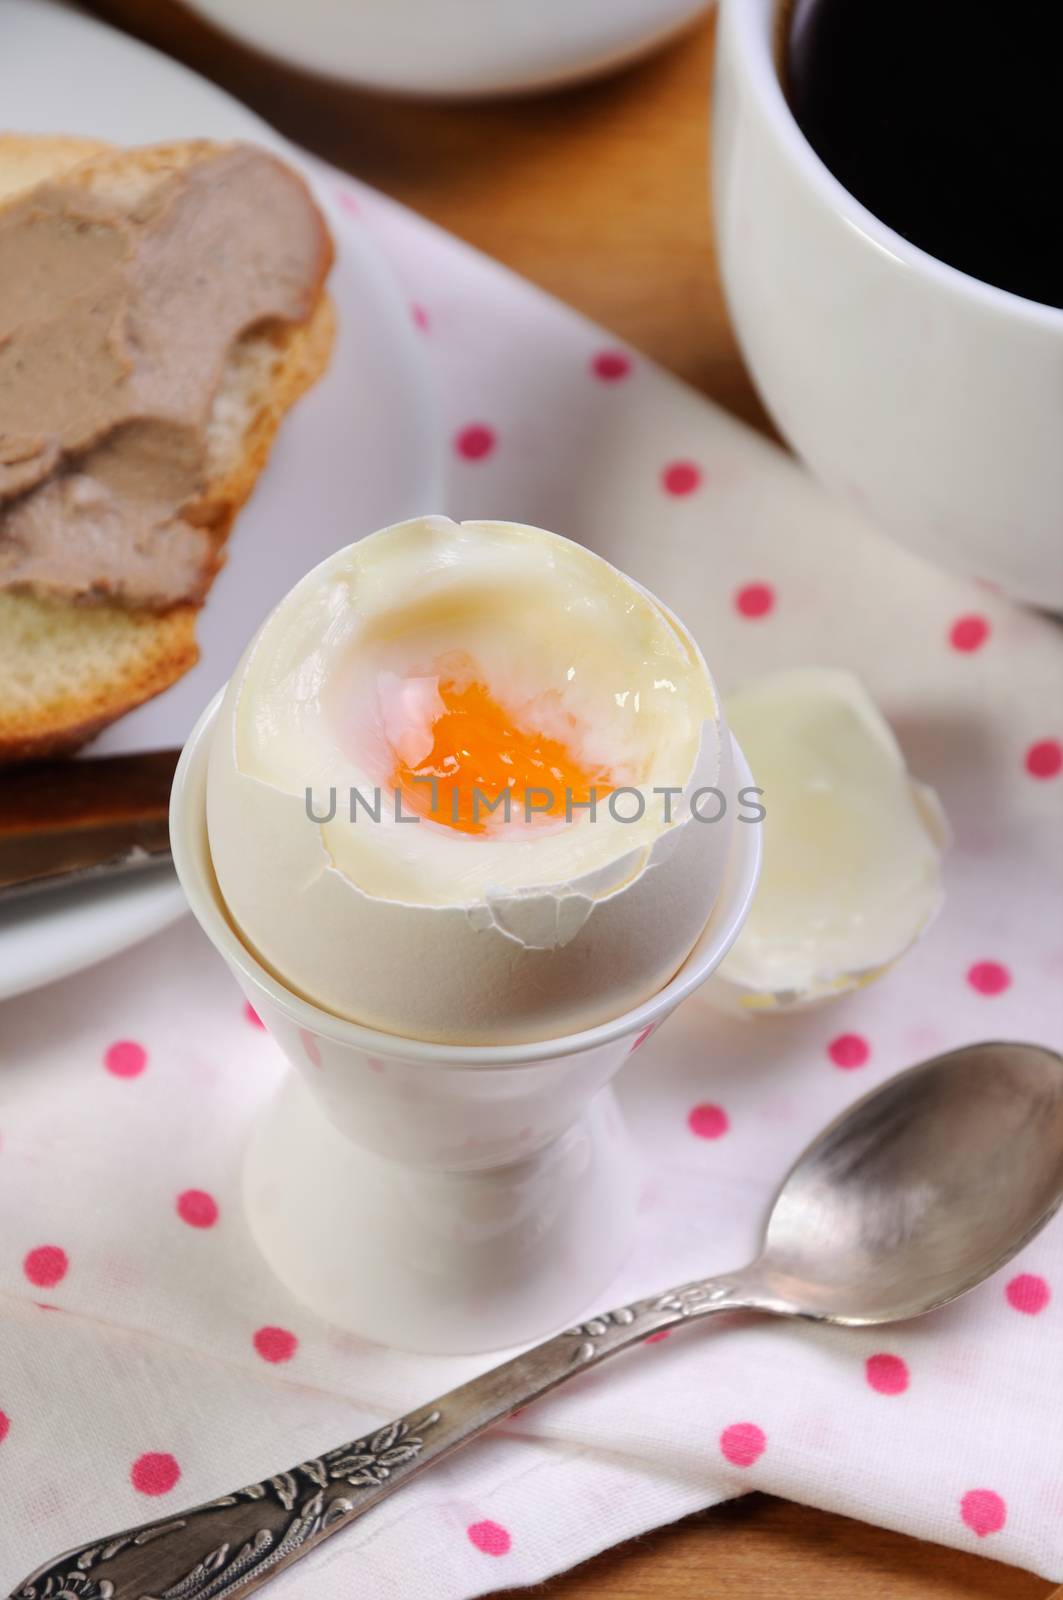 Eggs boiled in pashotnitse for breakfast with a cup of coffee and liver pate